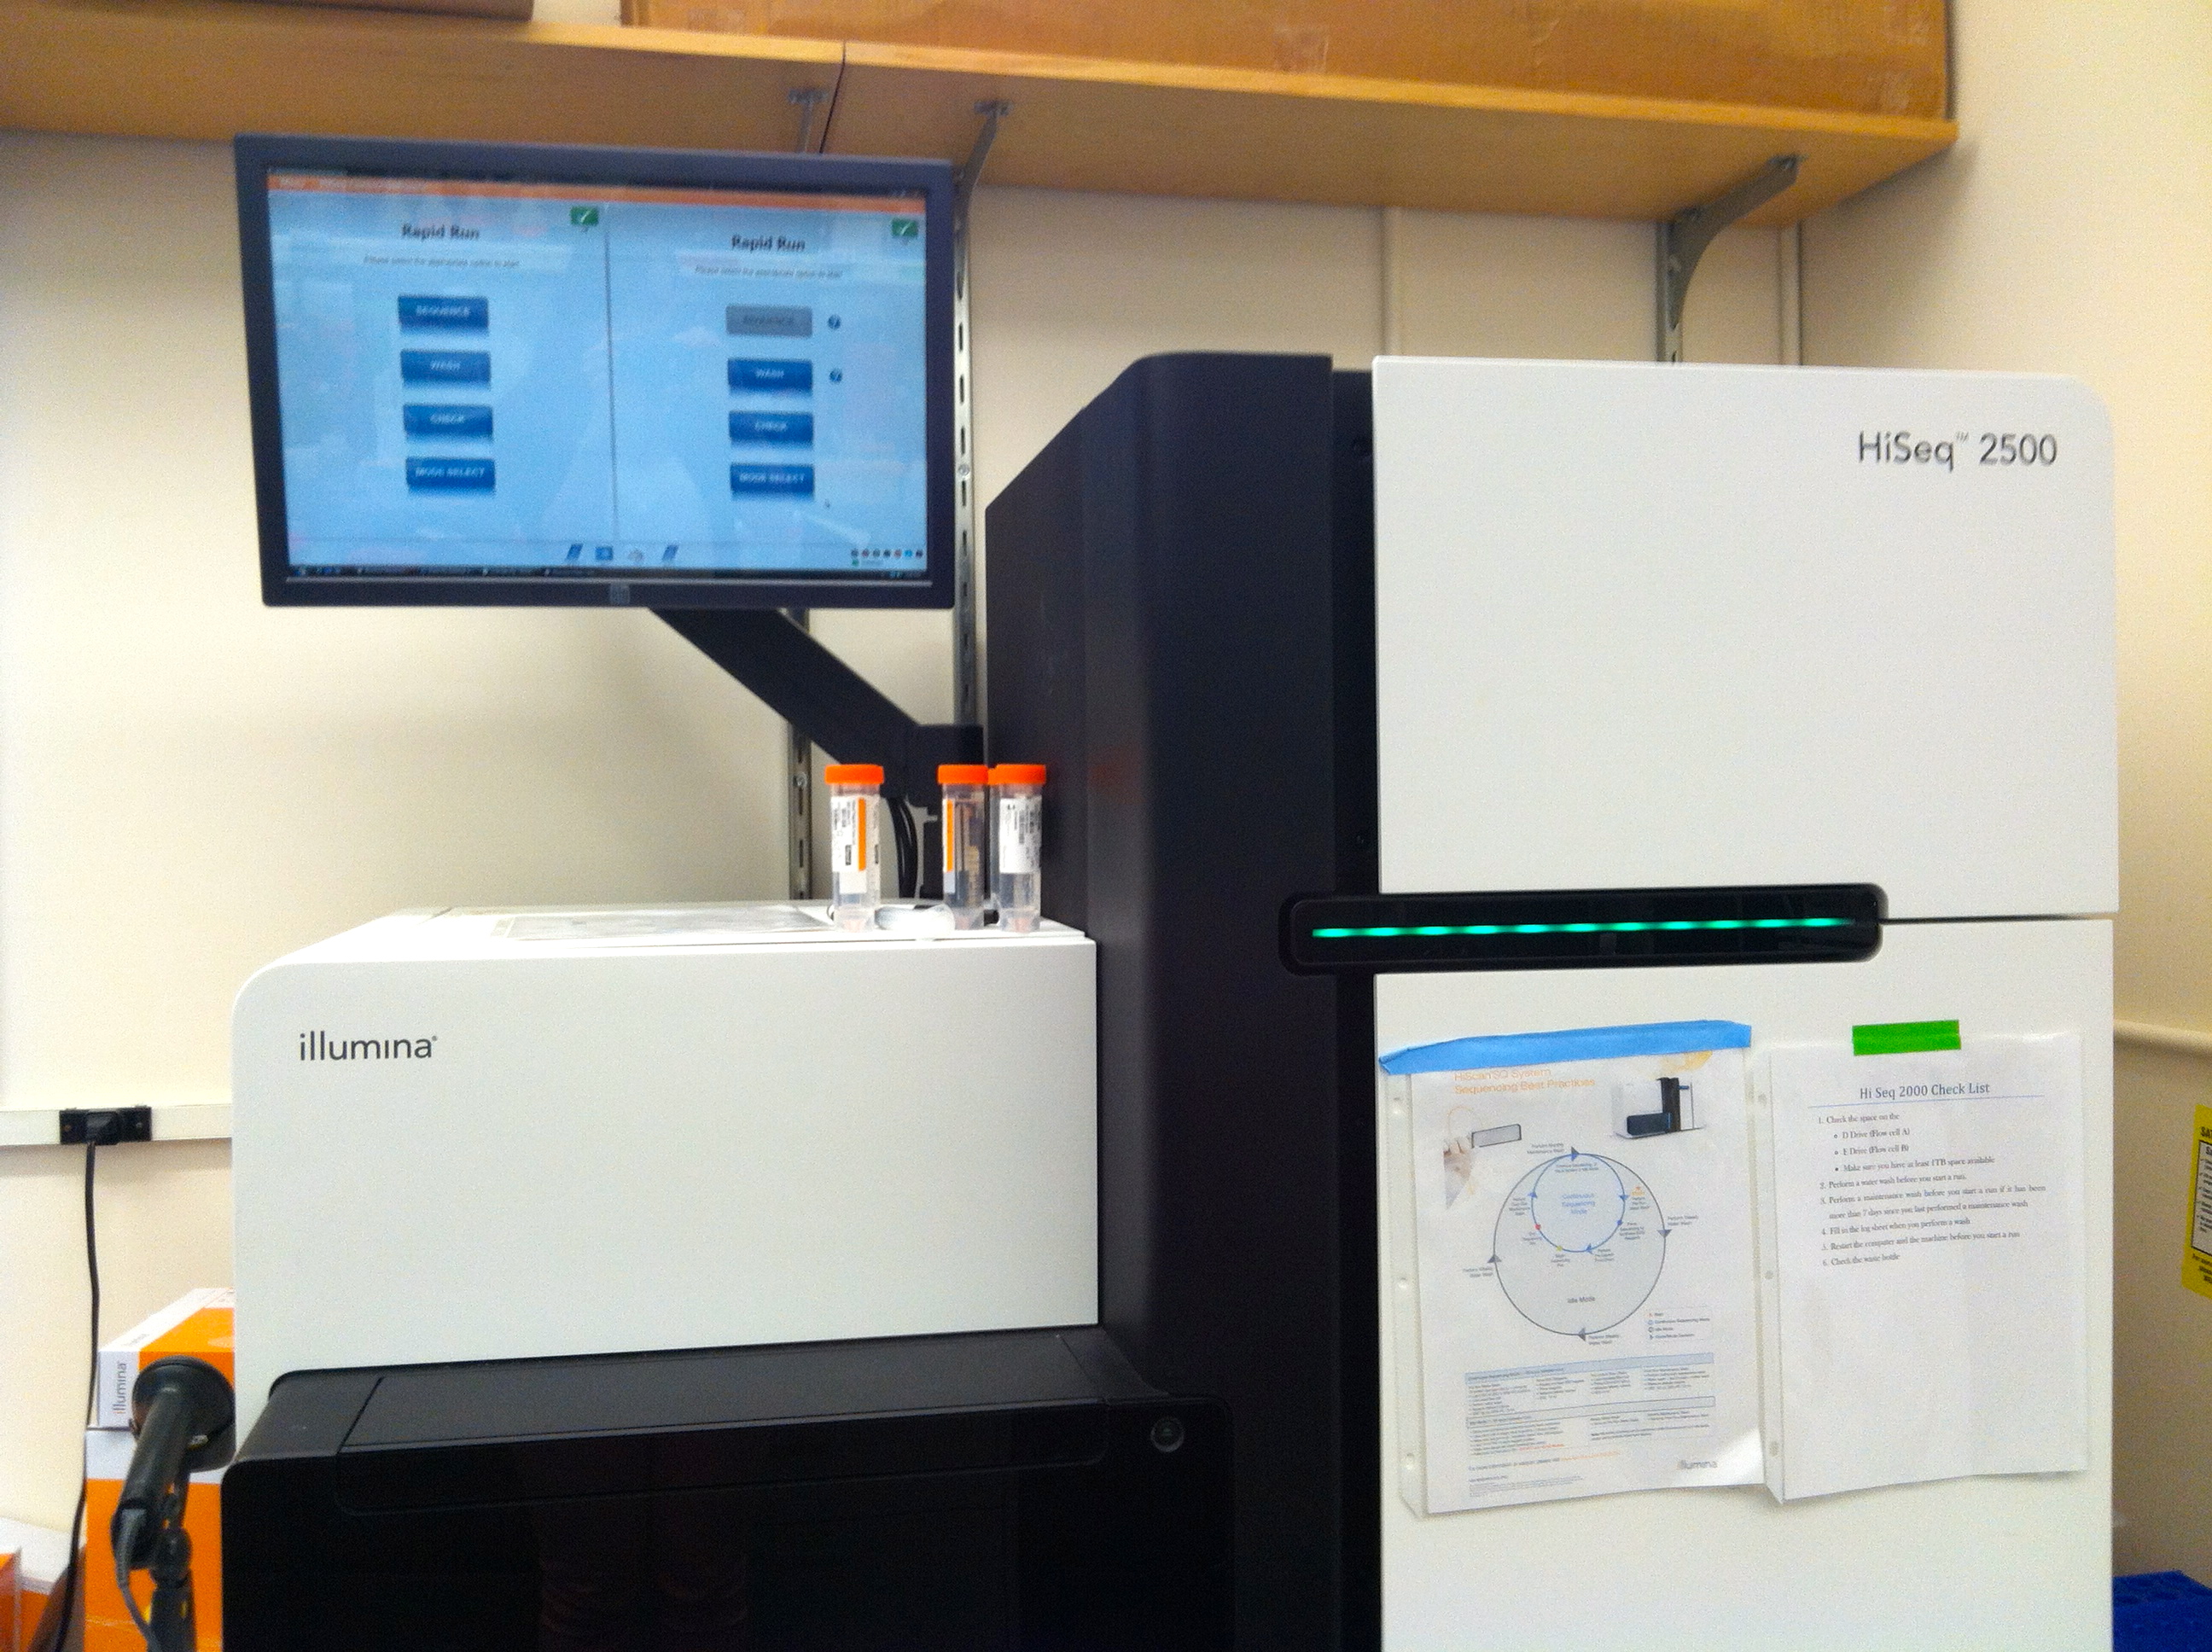 It may just look like a mini-fridge, but check out what this baby can do: http://www.illumina.com/systems/hiseq_2500_1500.ilmn